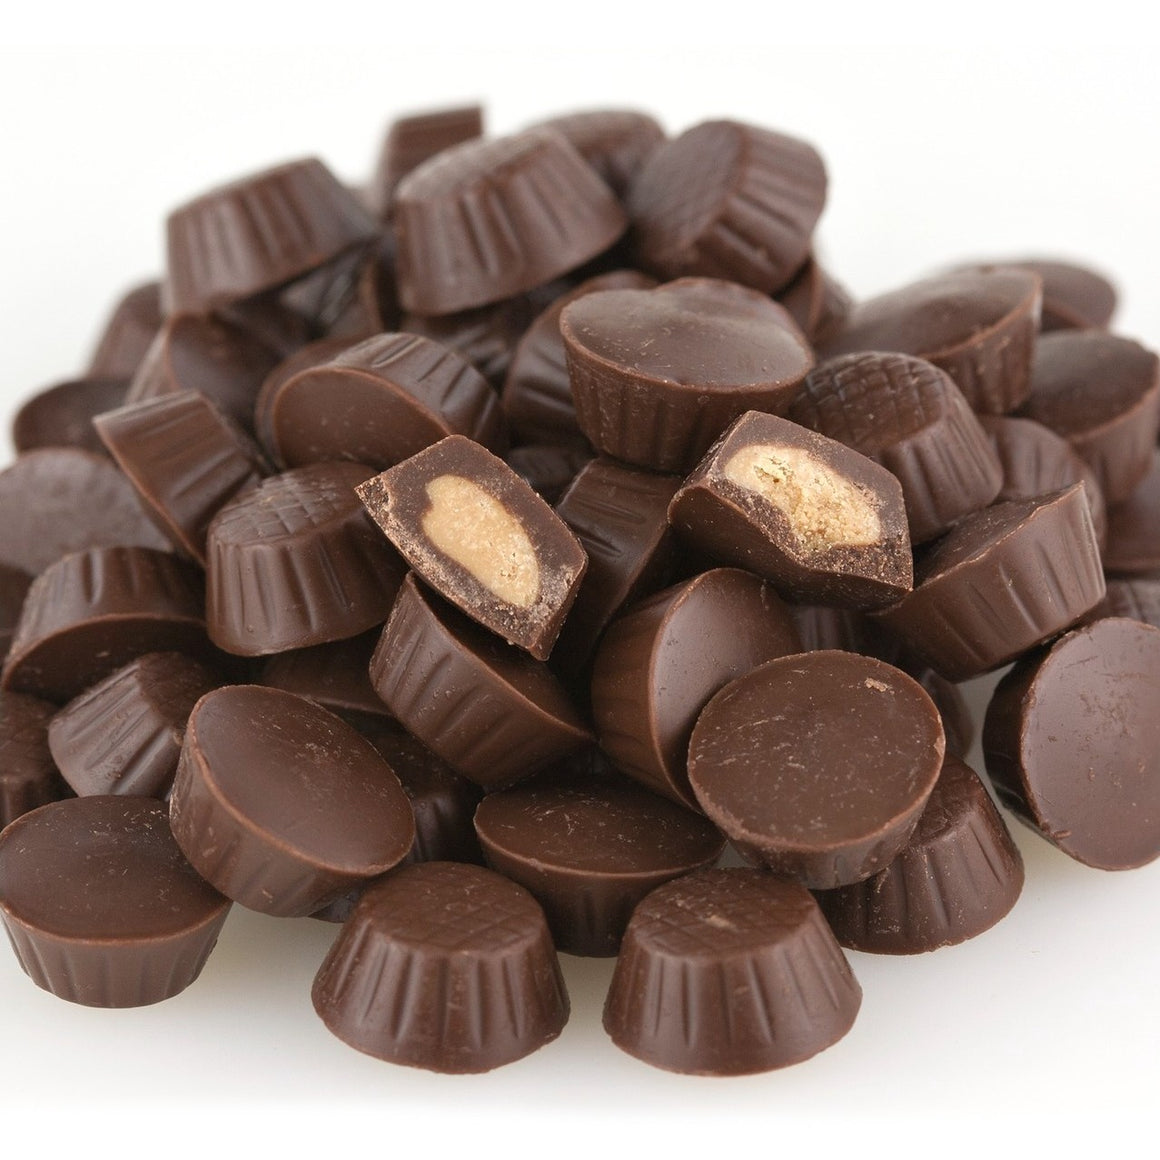 All City Candy Gertrude Hawk Sugar Free Mini Milk Chocolate Flavored Peanut Butter Cups 2 lb. Bag Bulk Unwrapped Gertrude Hawk For fresh candy and great service, visit www.allcitycandy.com